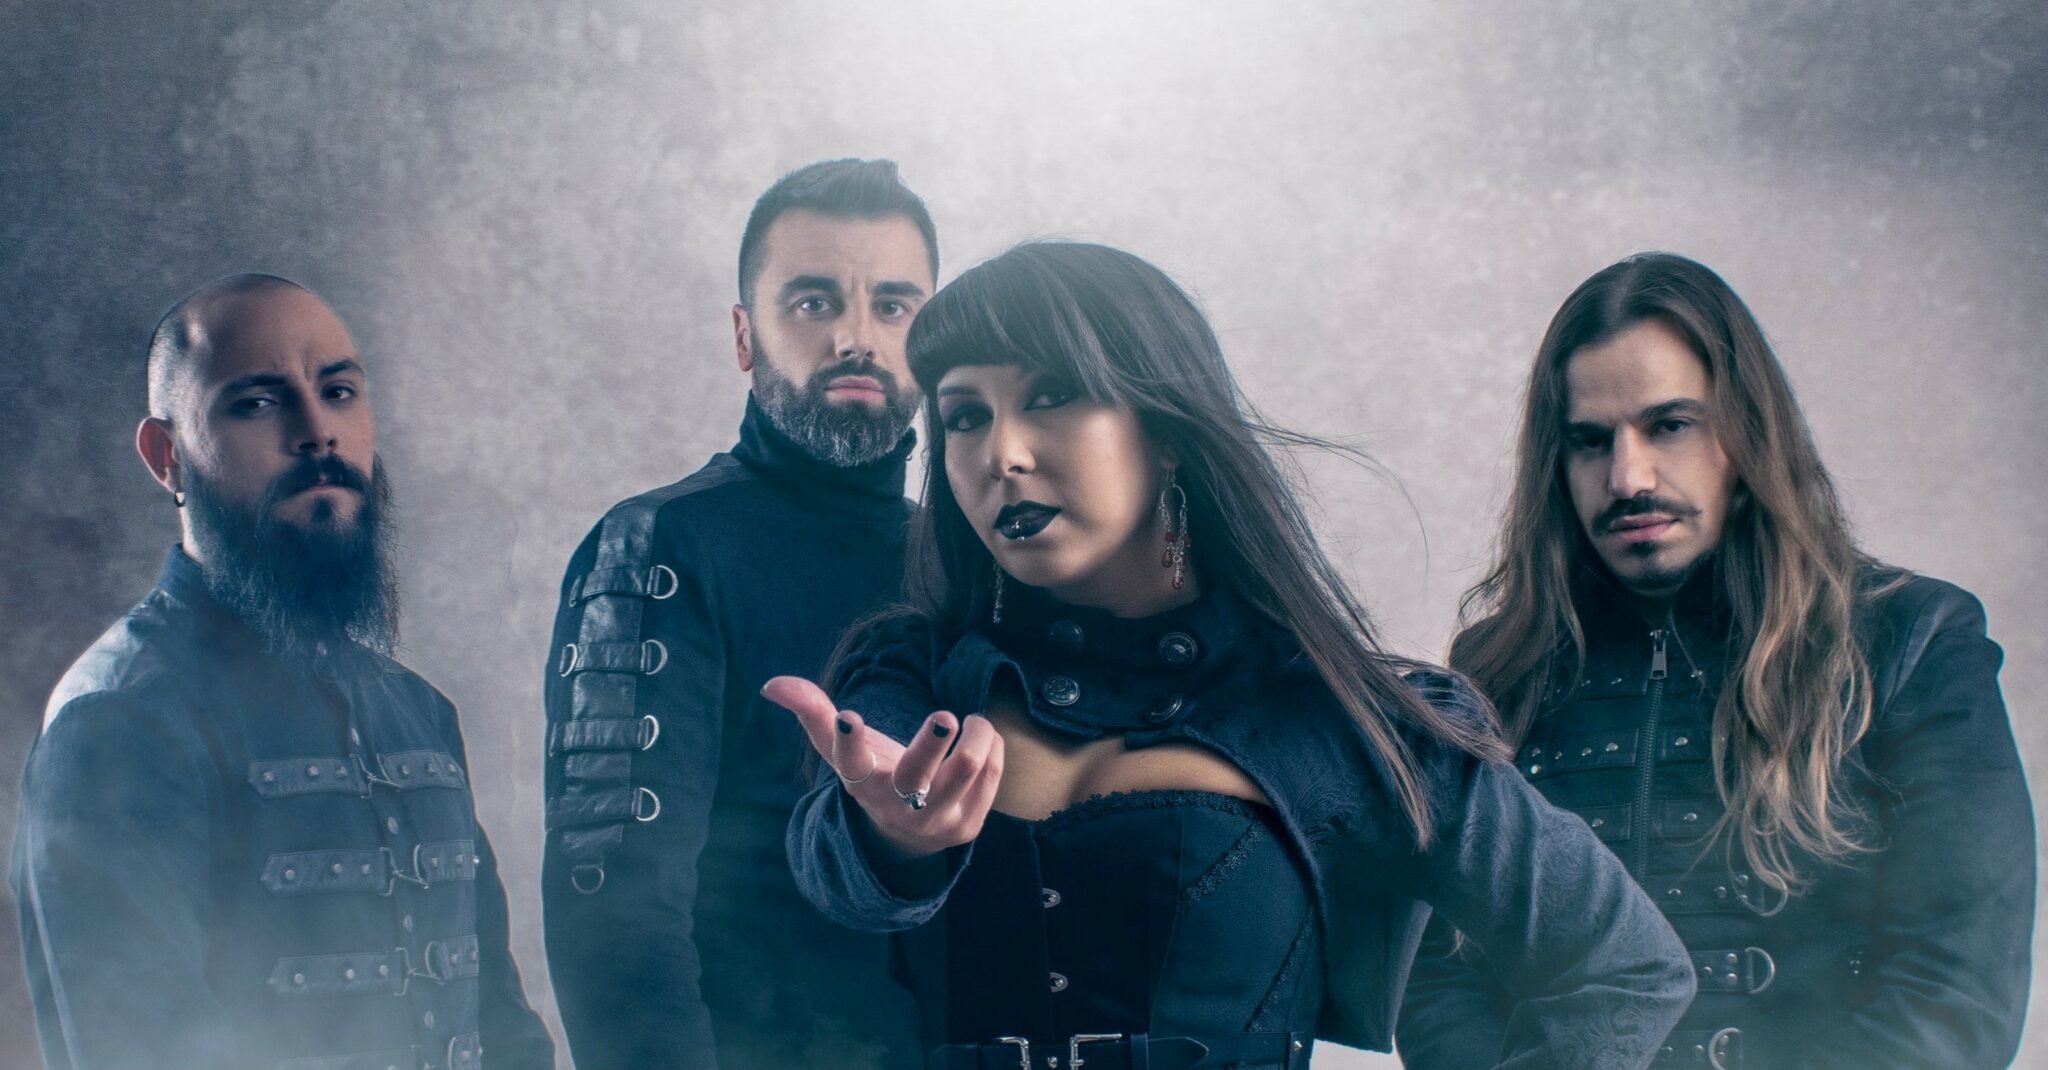 Read more about the article SEDE VACANTE release music video for new single “Dead New World”.